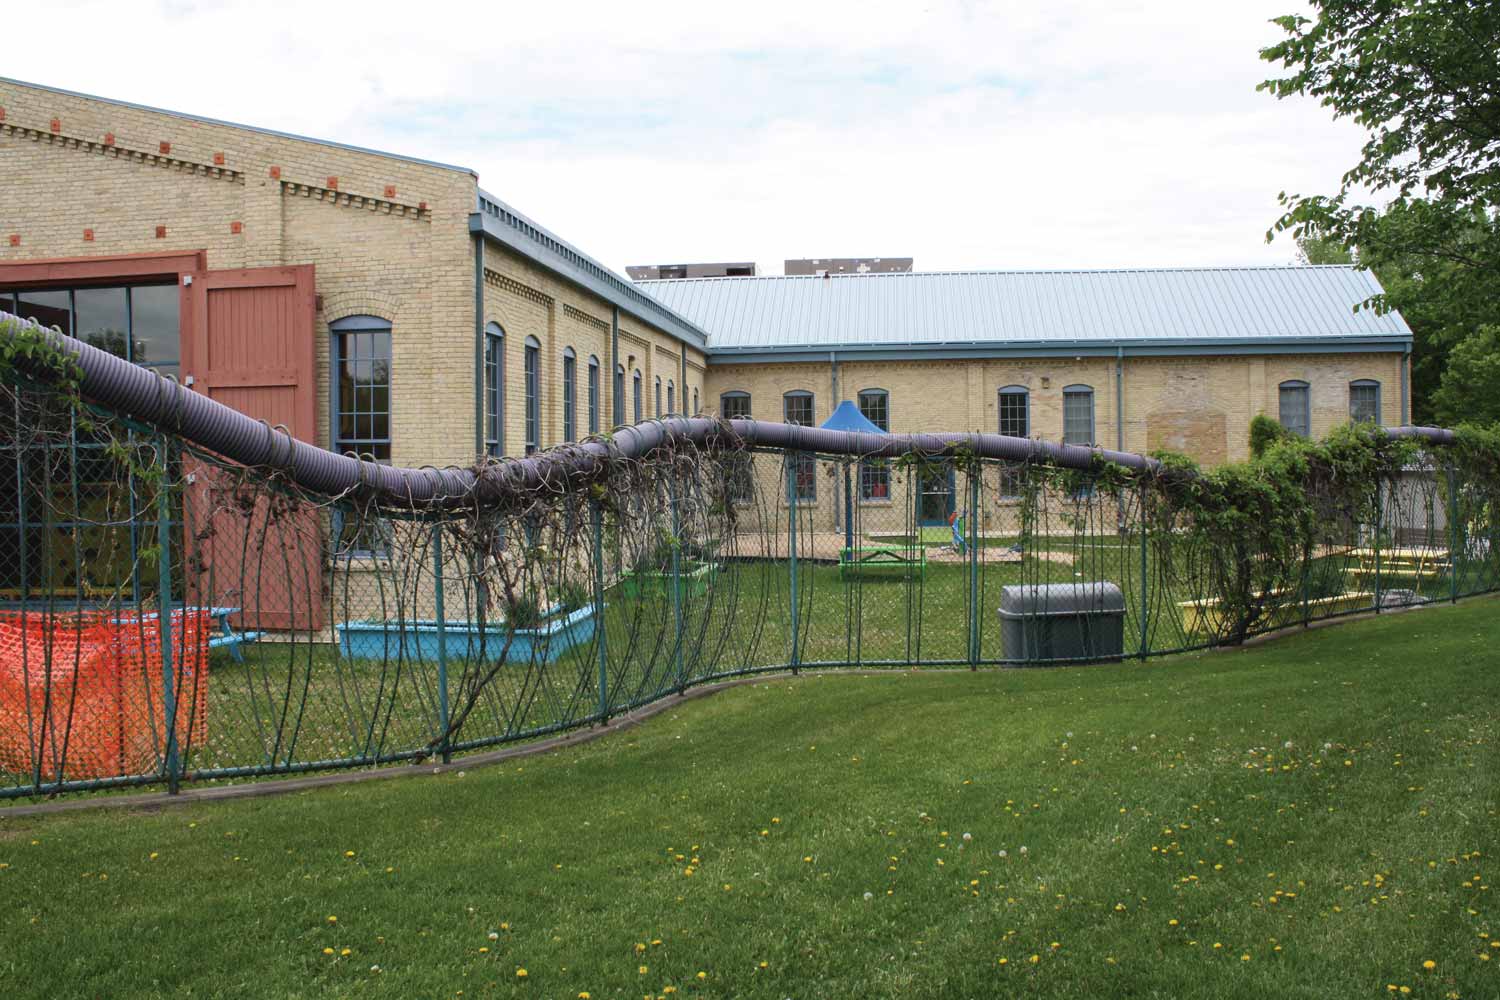 The Children's Museum in 2015, shown from the south-southeast. A wavy fence around the building contains a grassy area with garden boxes and a picnic table.